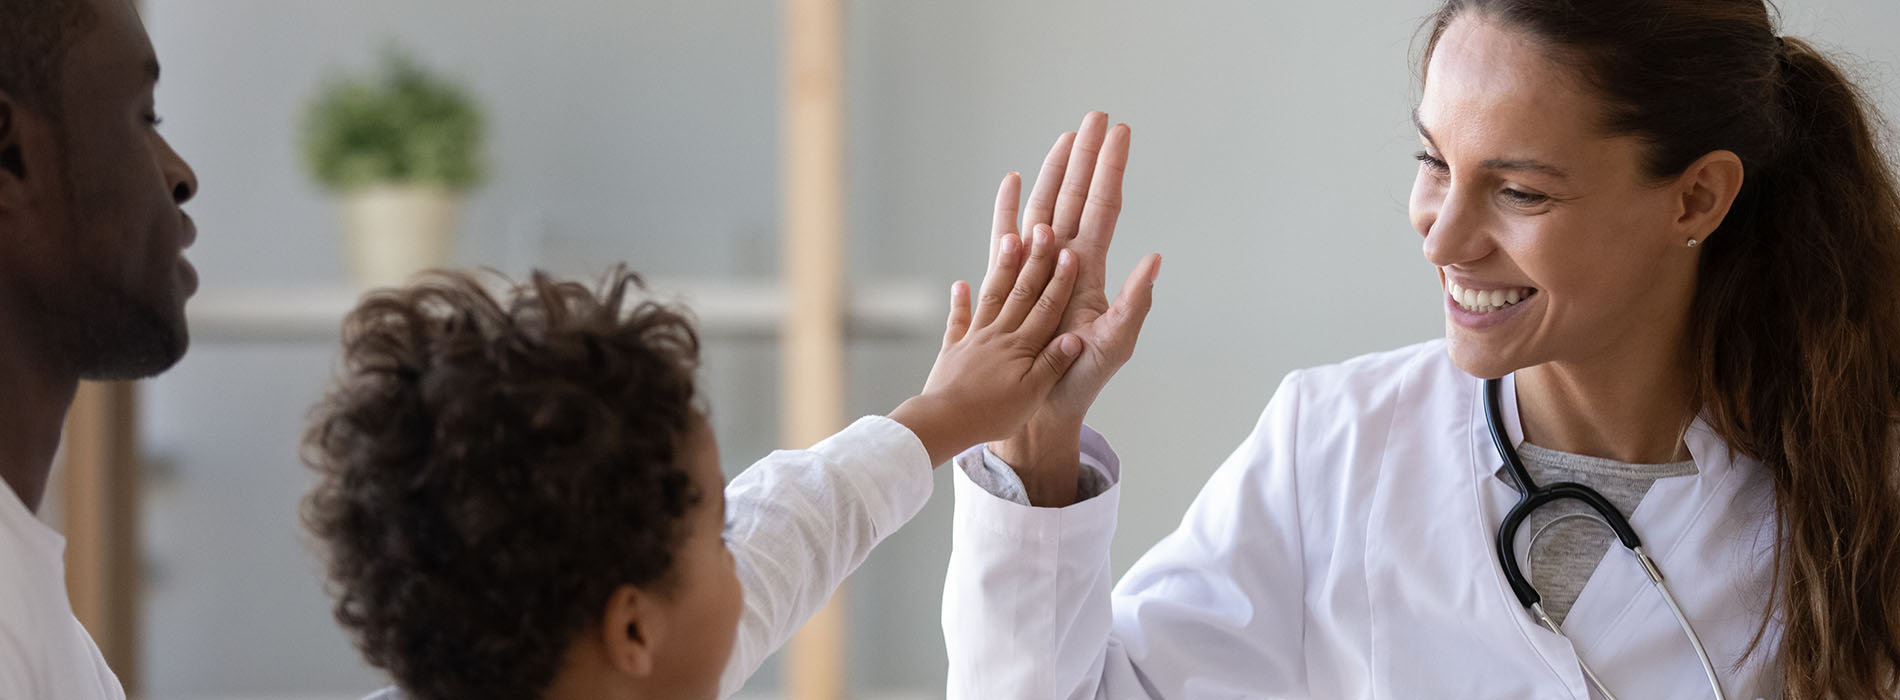 A woman and a child are high-fiving in front of a healthcare professional, with the three of them smiling.